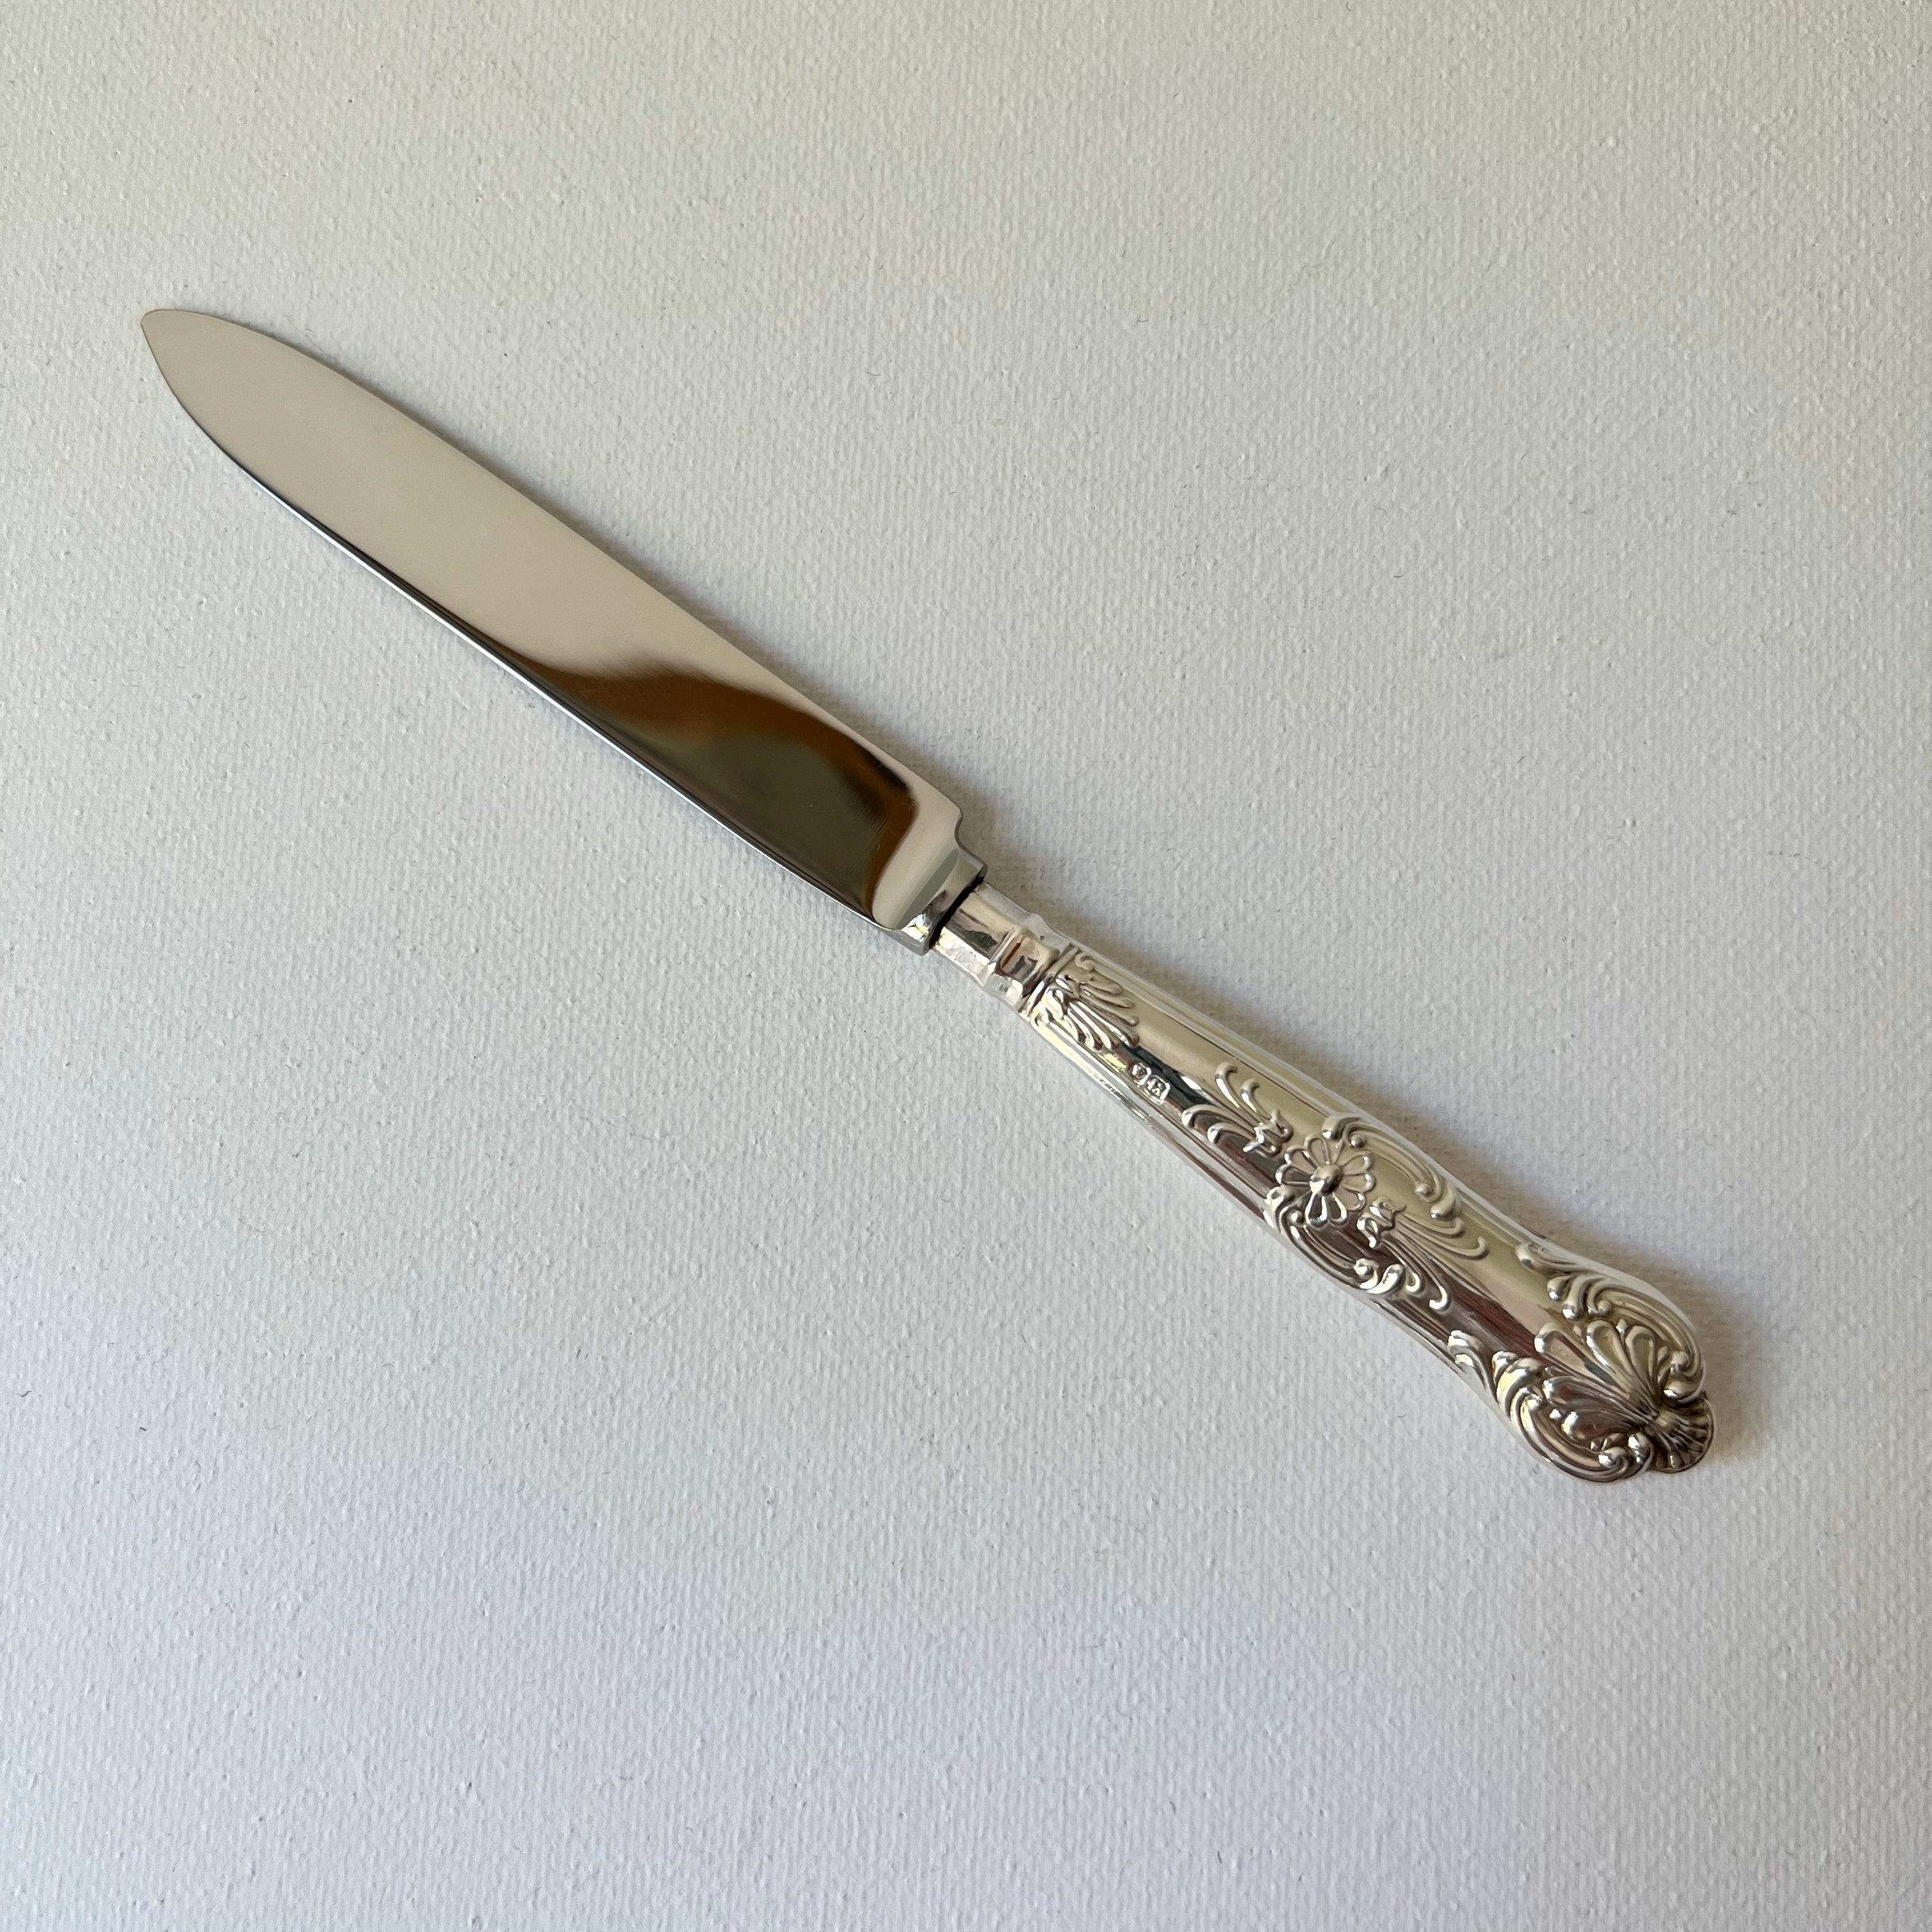 Antique】England Charles Havenhand 1920s Silver Butter Knife 